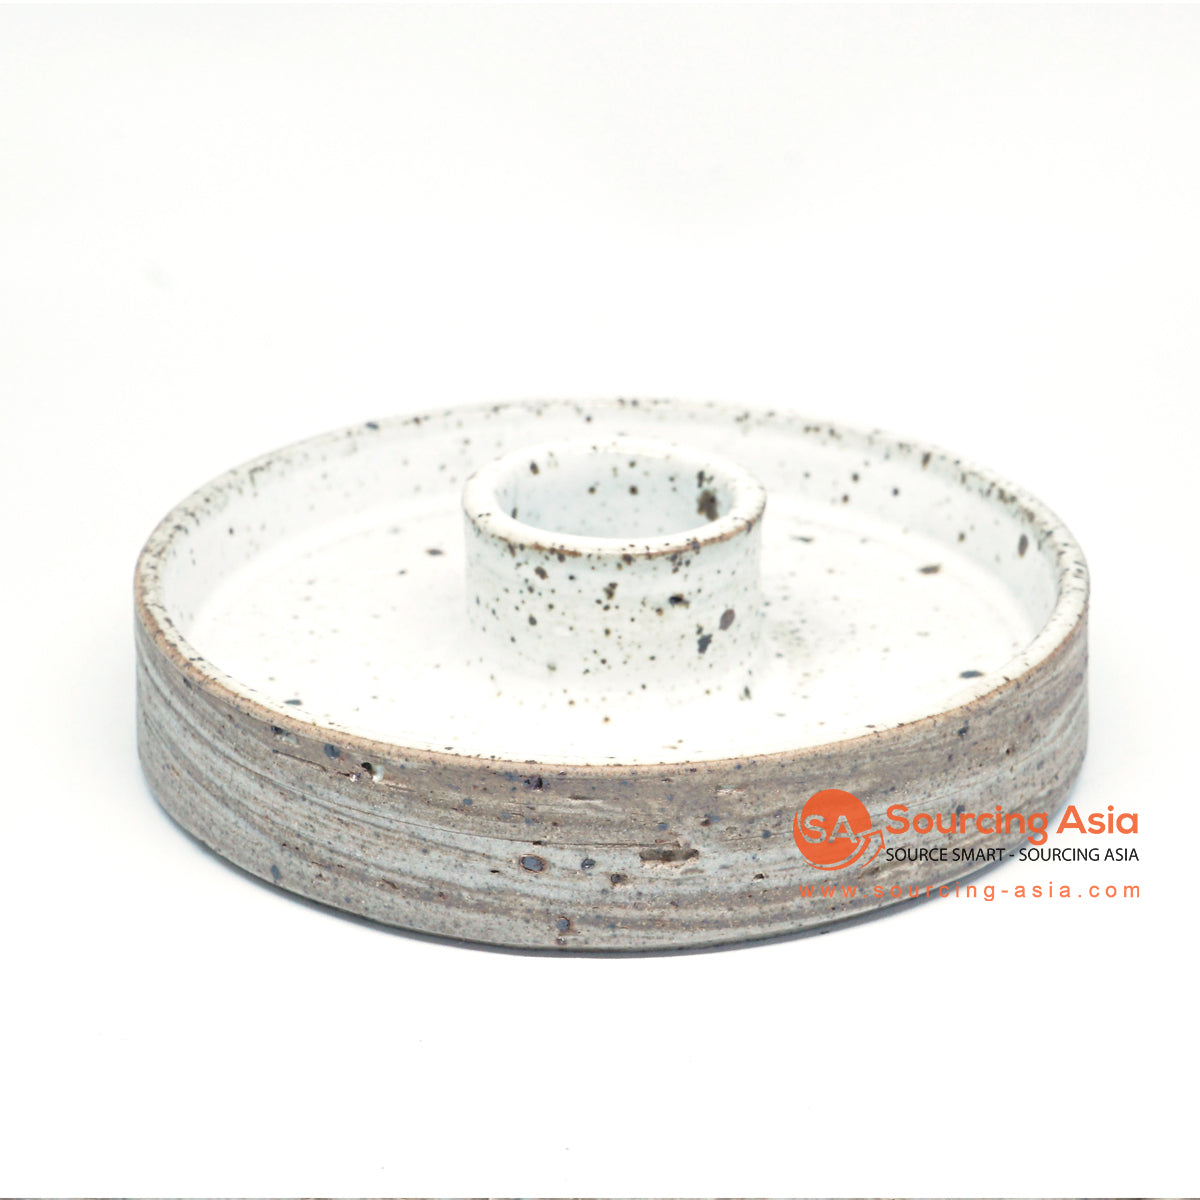 PNJ047 WHITE OPAX MIX MATERIALS CERAMIC CANDLE HOLDER WITH SPECKLES